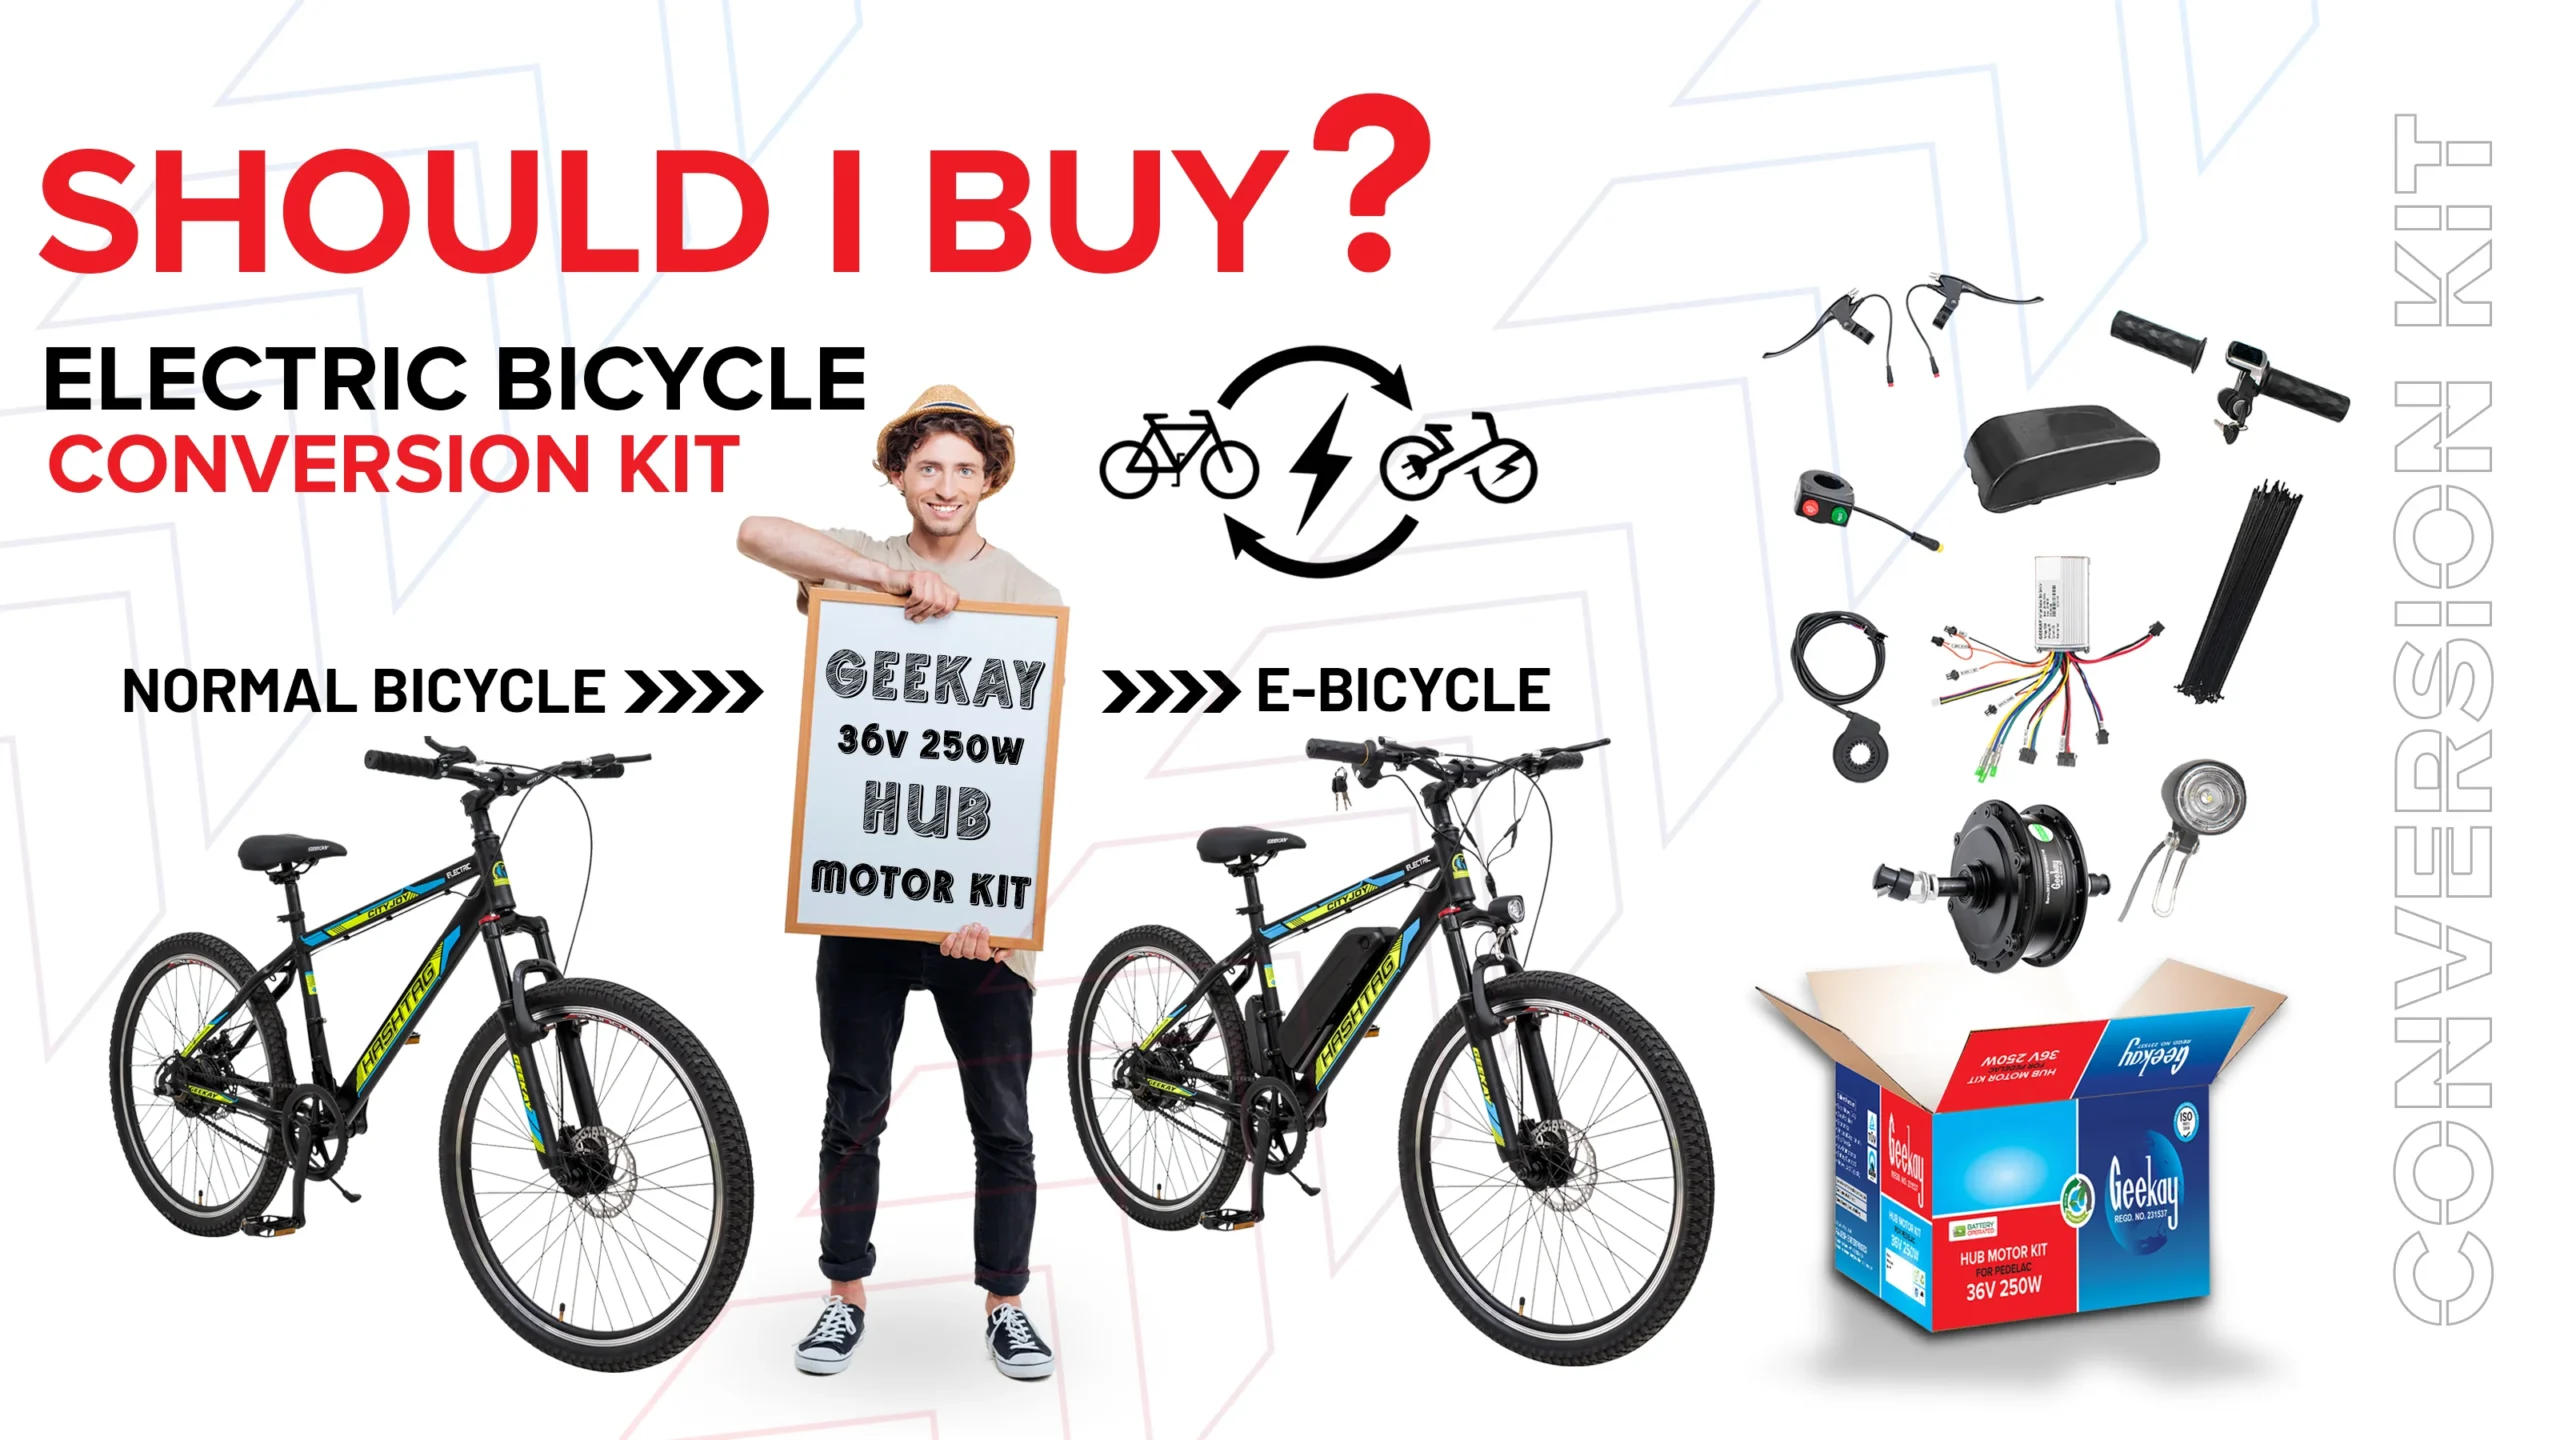 Should I Buy an Electric Bicycle Conversion Kit?